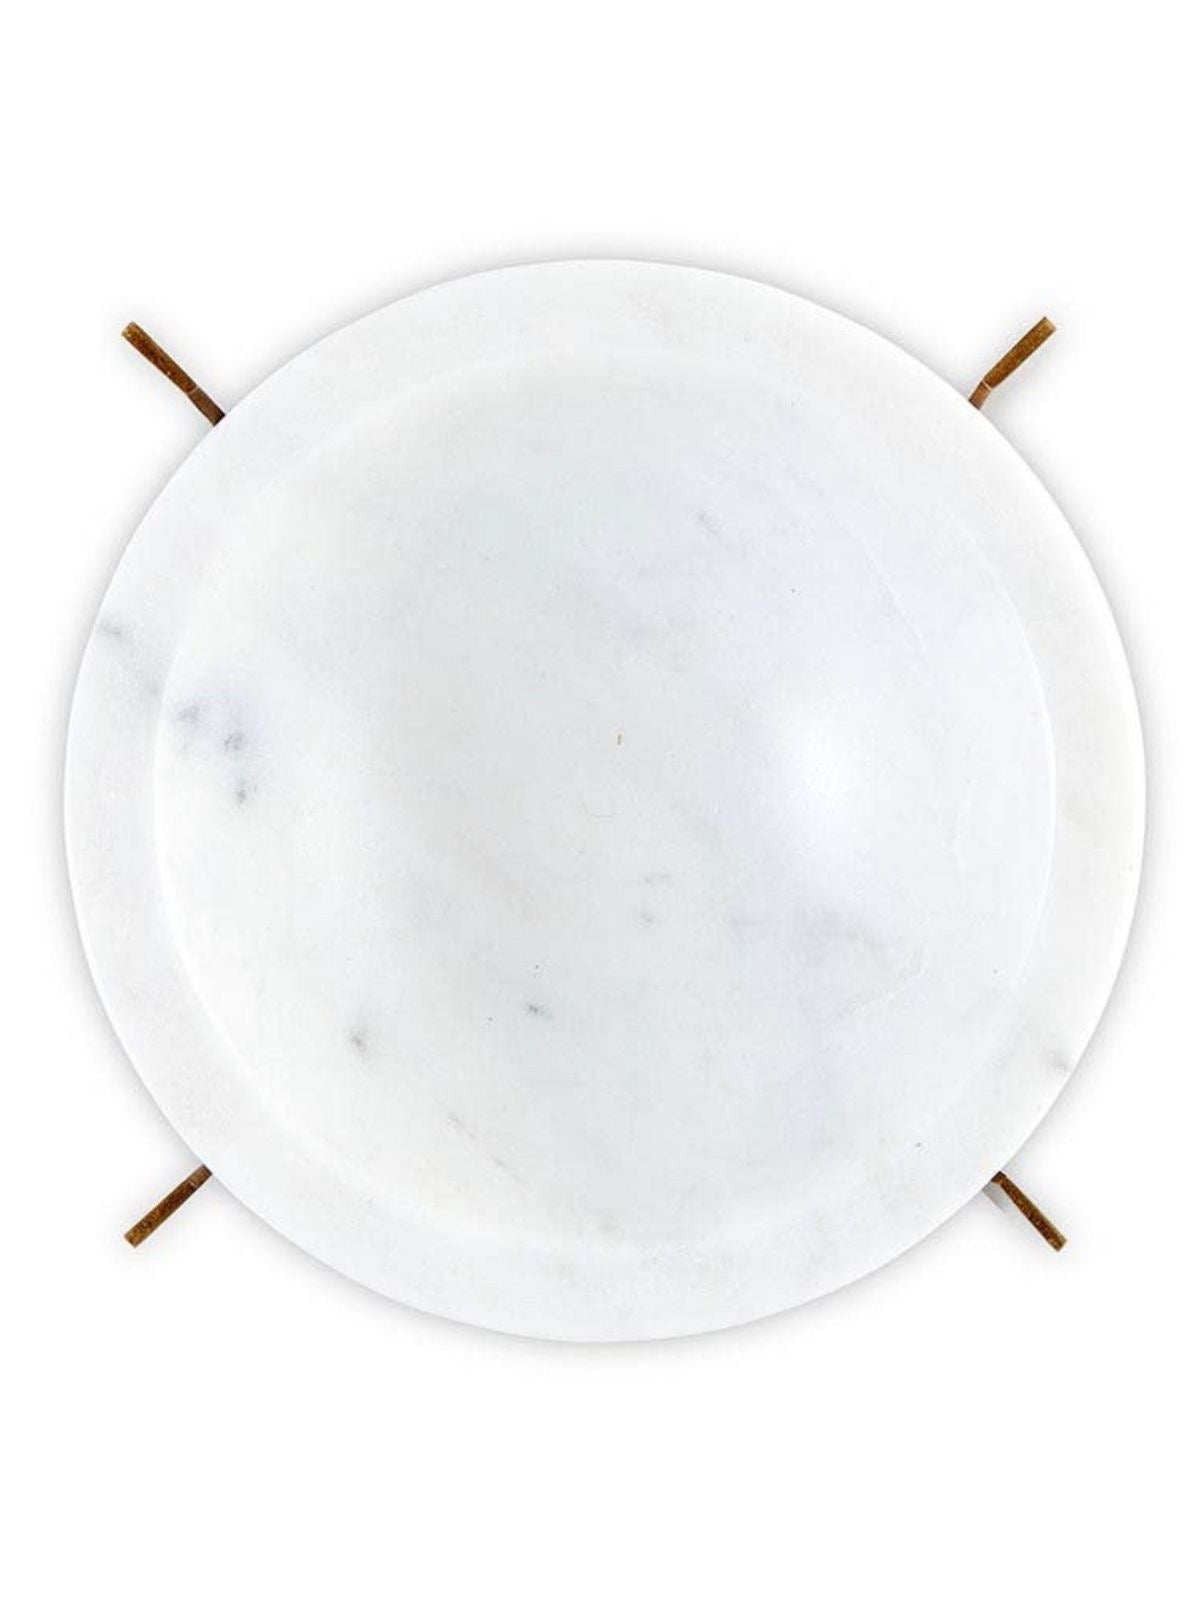 This 7 inch White marble bowl in a brass stand is elegant and simple in design which makes it perfect for keeping dips and toppings chilled while serving. Sold By KYA Home Decor. 